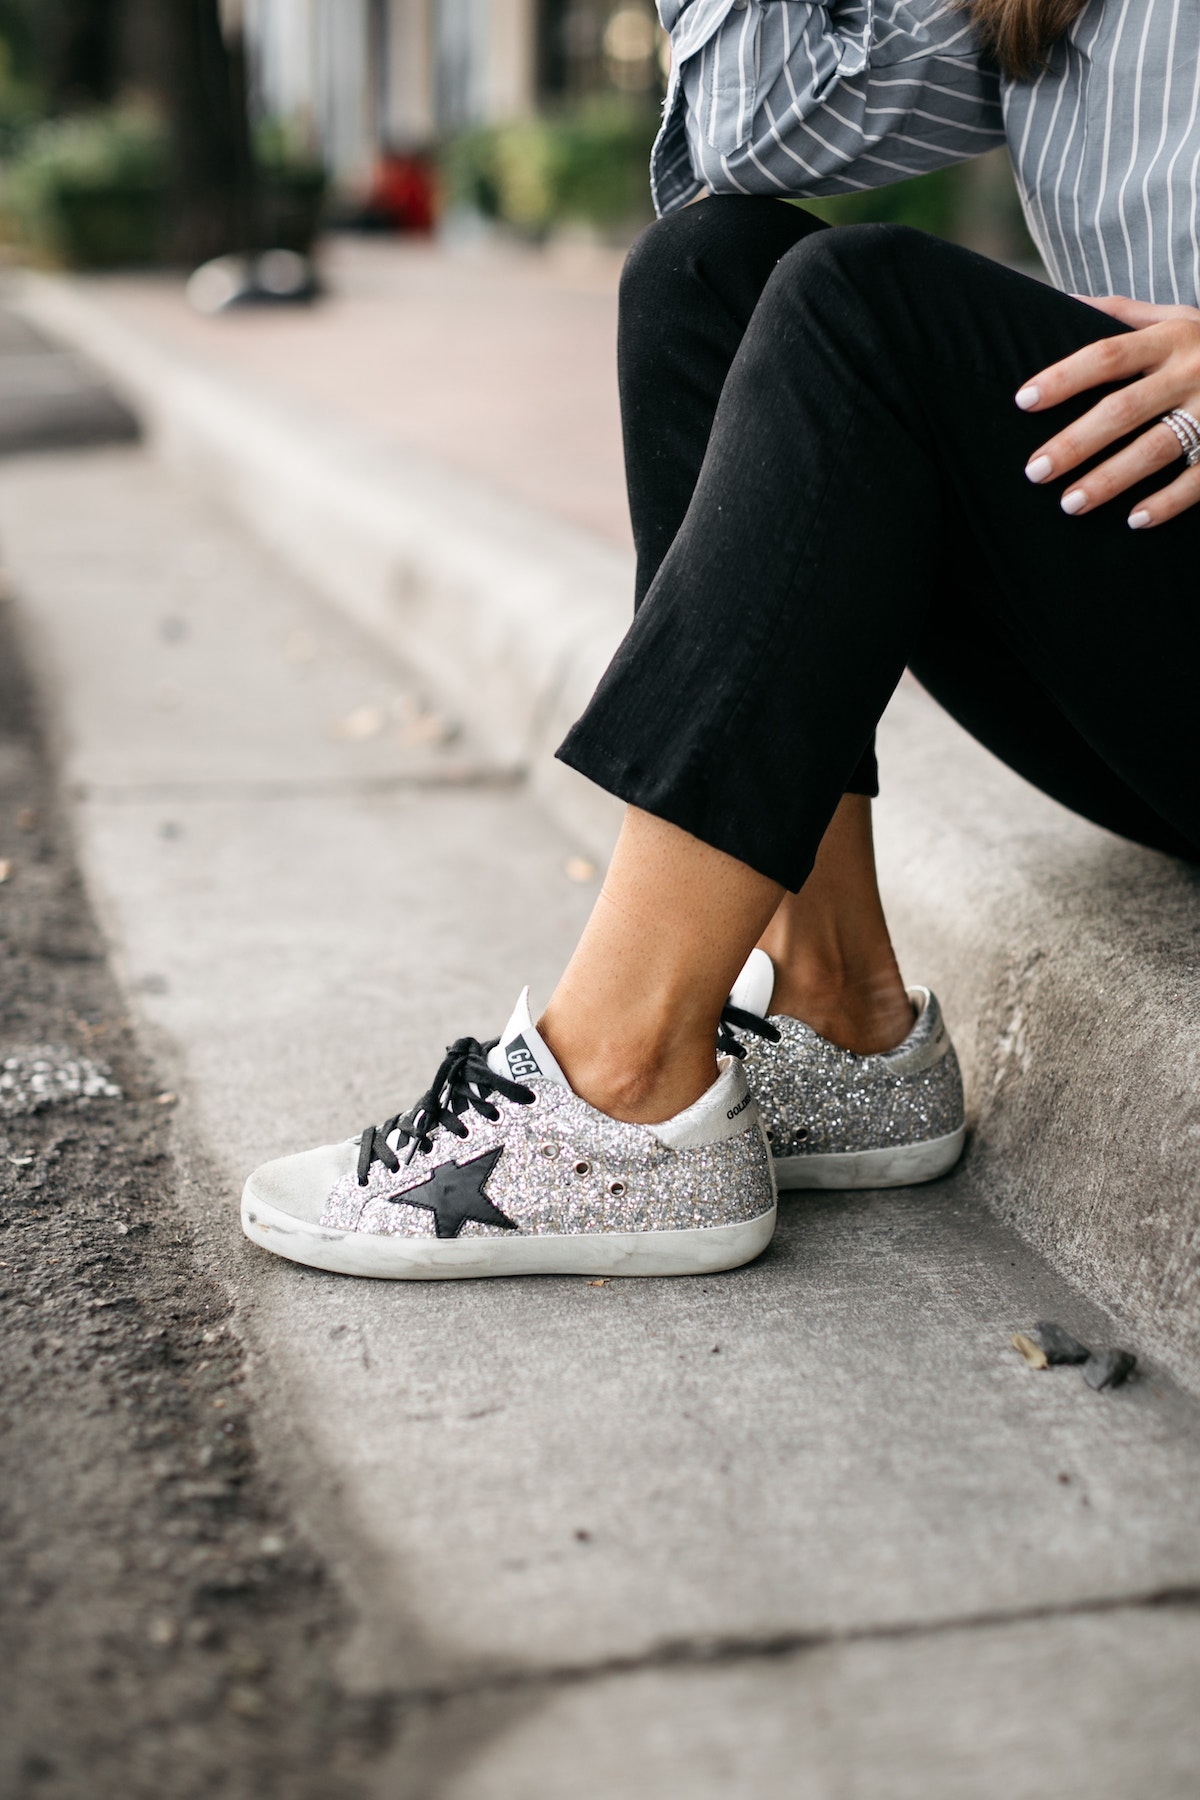 Are Golden Goose Sneakers Worth It? • BrightonTheDay